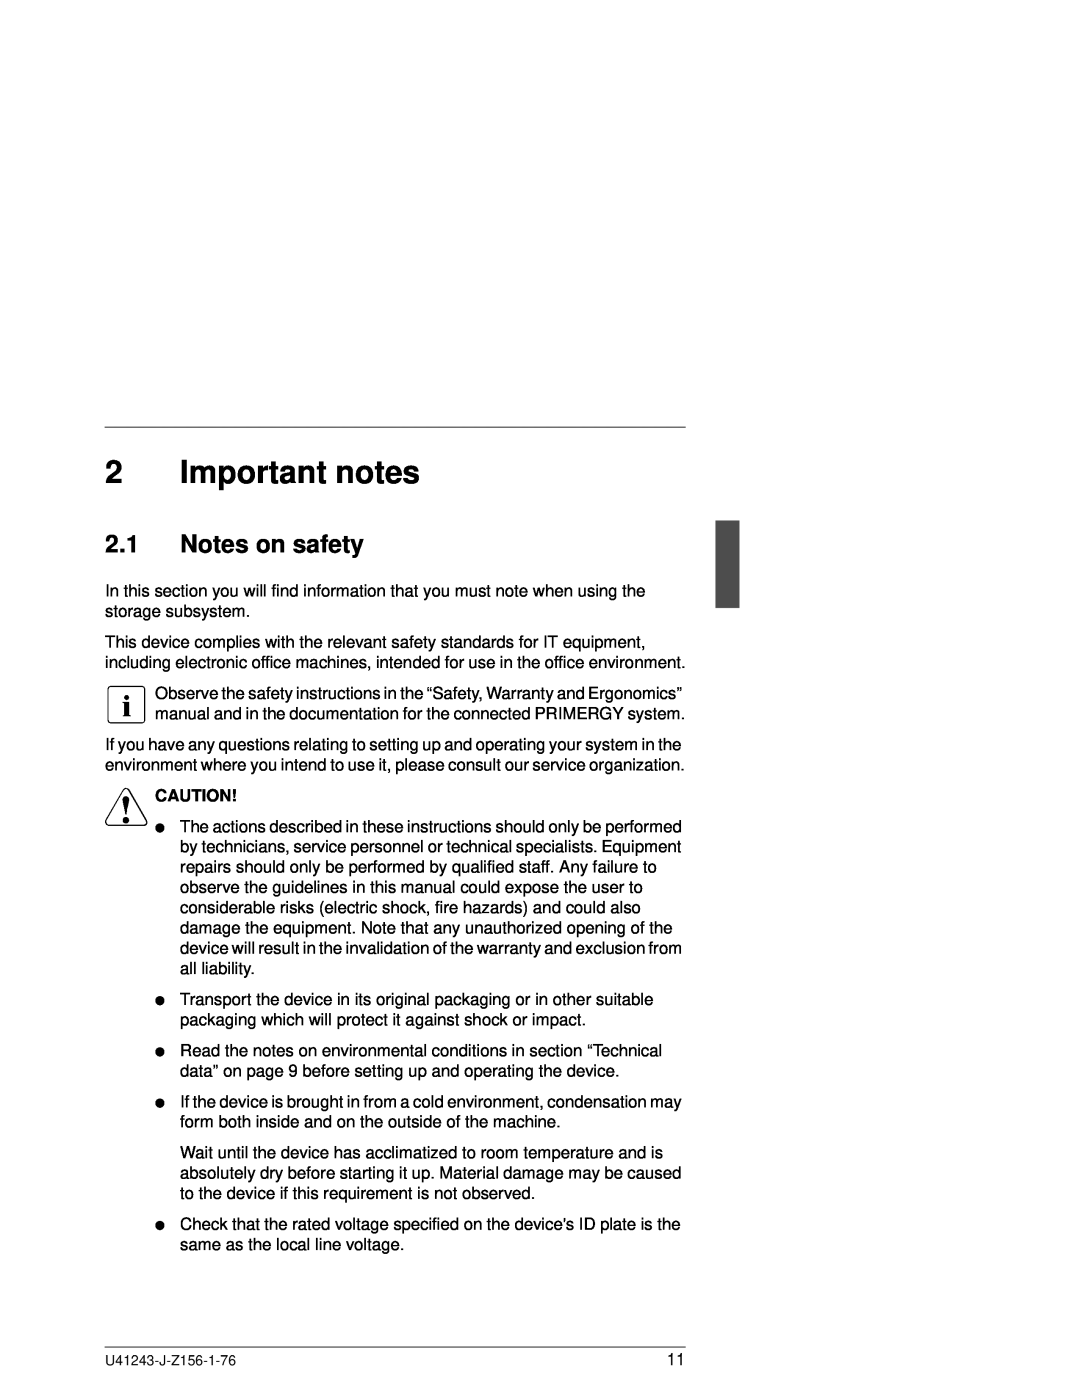 Fujitsu N800 manual Important notes, Notes on safety, V Caution 